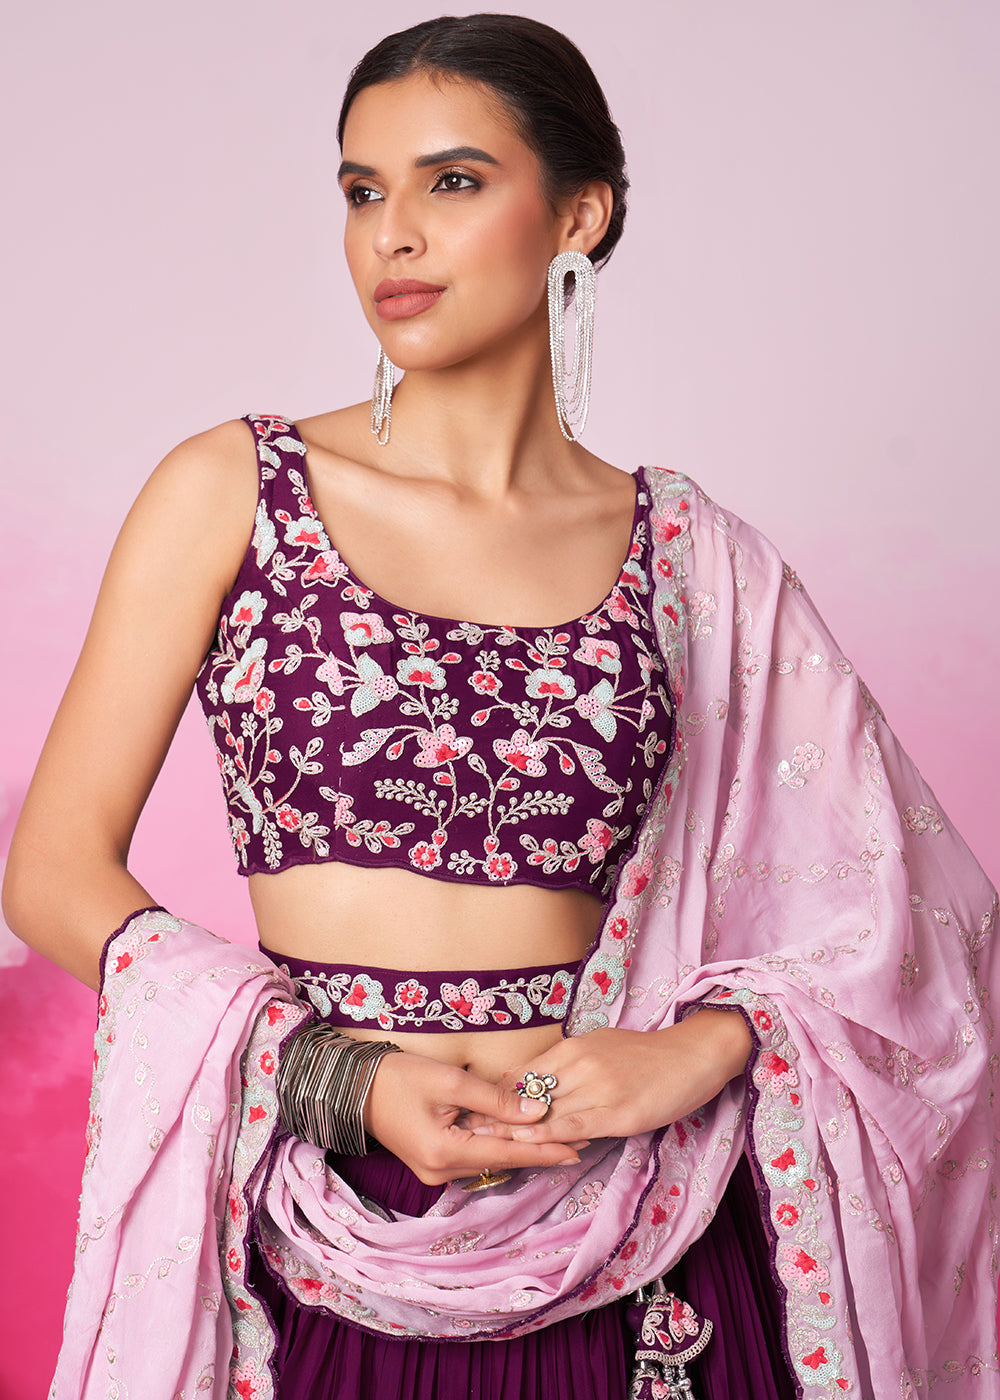 Buy Now Burgundy Pure Georgette Sequins Embroidered Lehenga Choli Online in USA, UK, Canada & Worldwide at Empress Clothing.